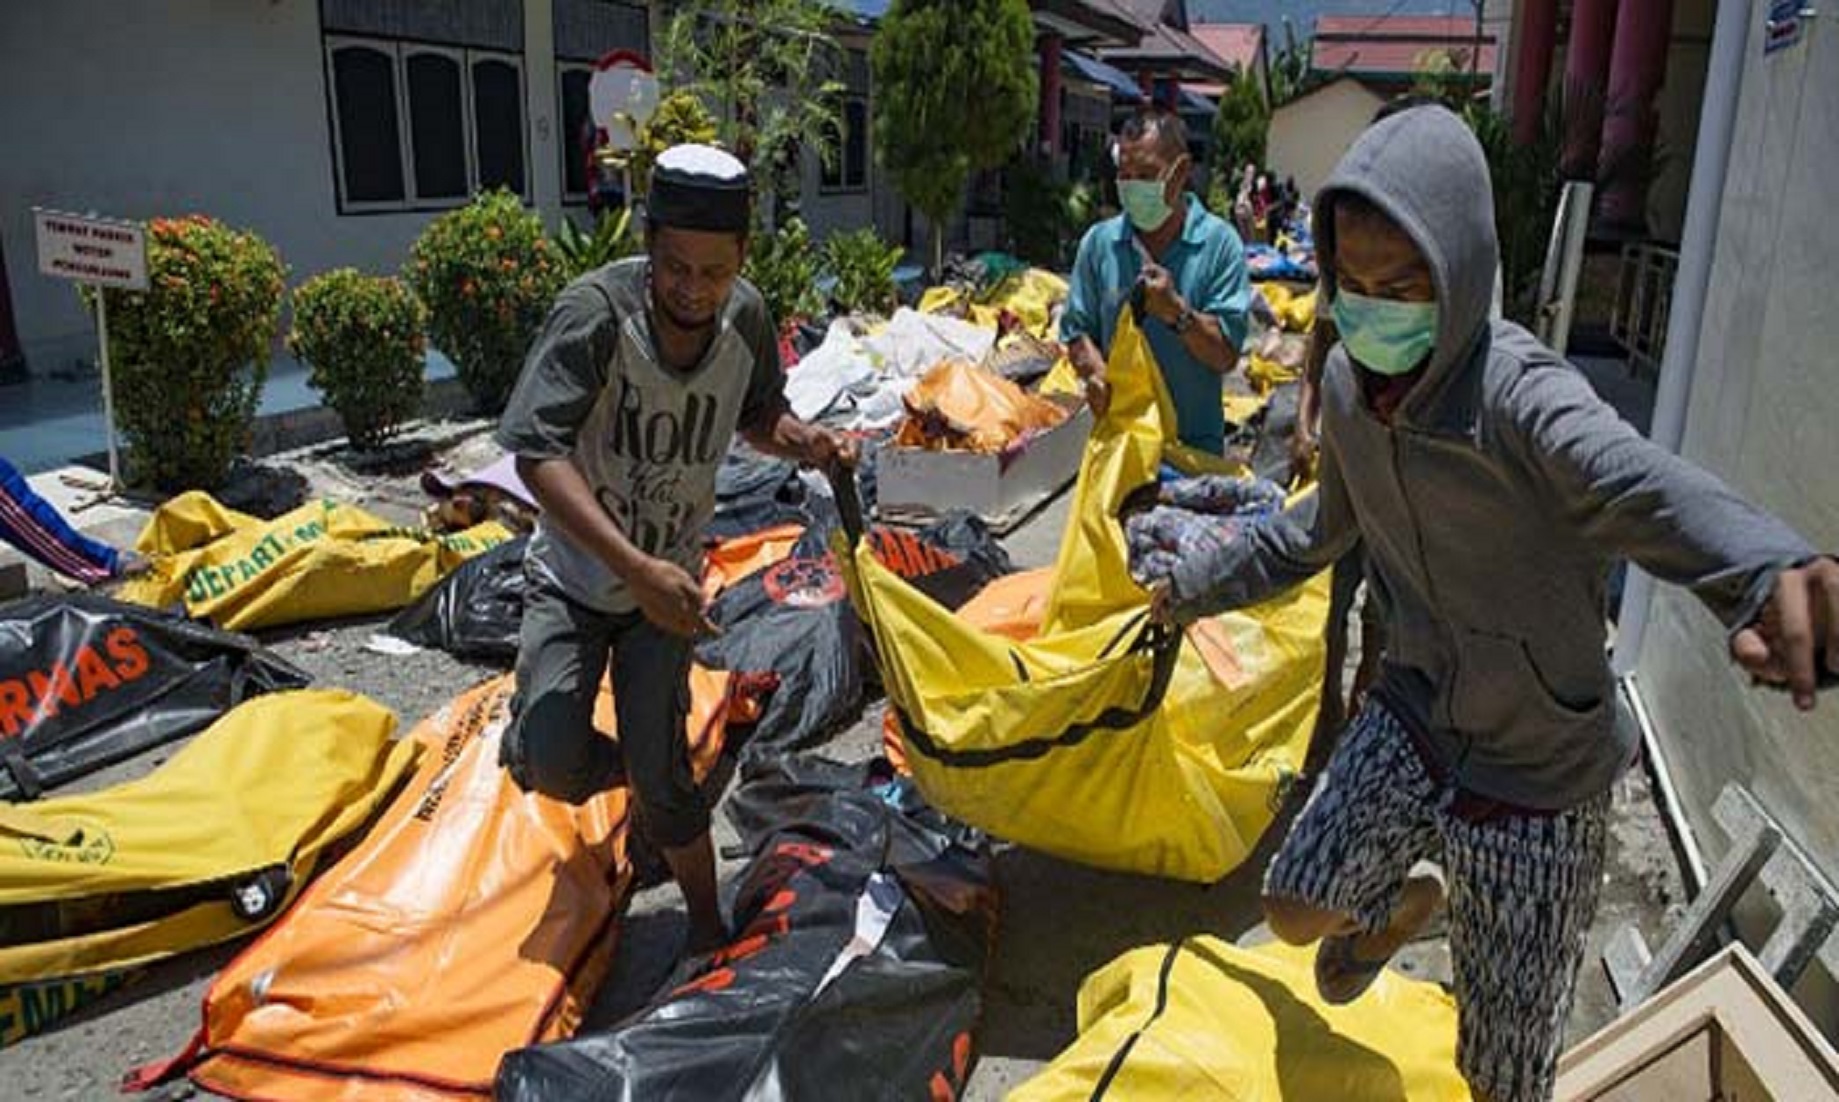 Death Toll Due To Tropical Cyclone Seroja In Indonesia’s East Nusa Tenggara Rises To 138